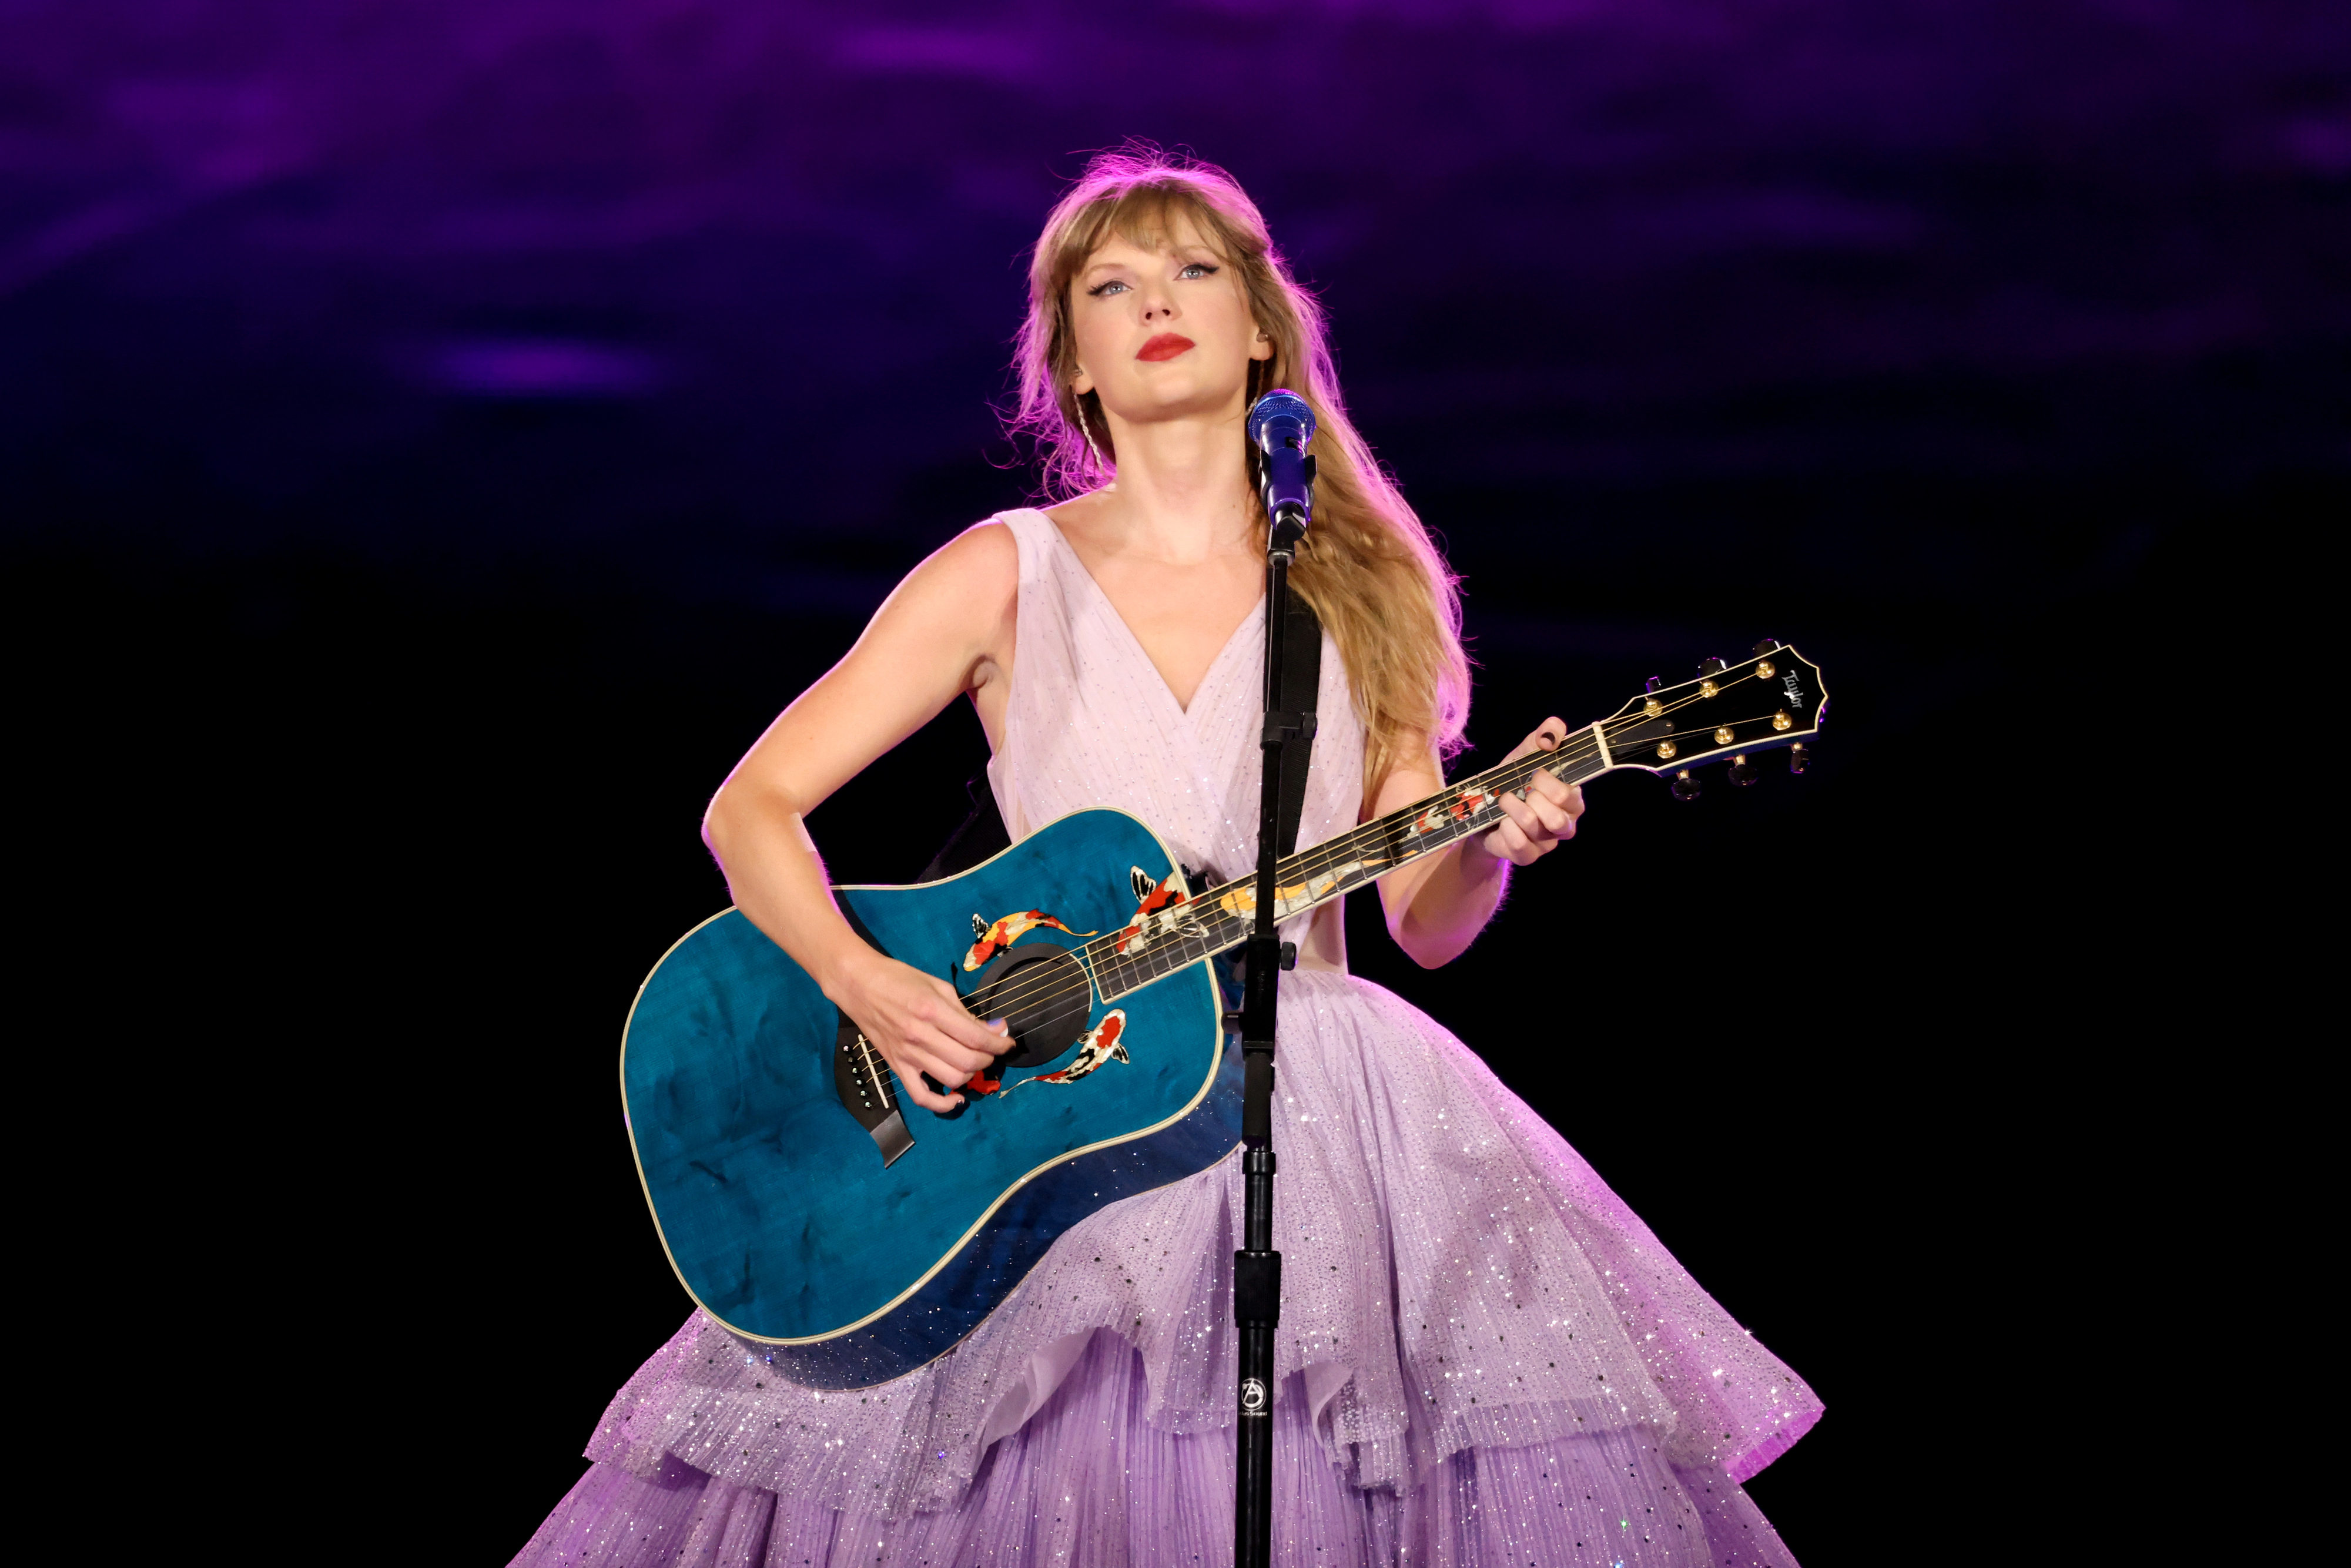 Taylor Swift onstage playing the guitar